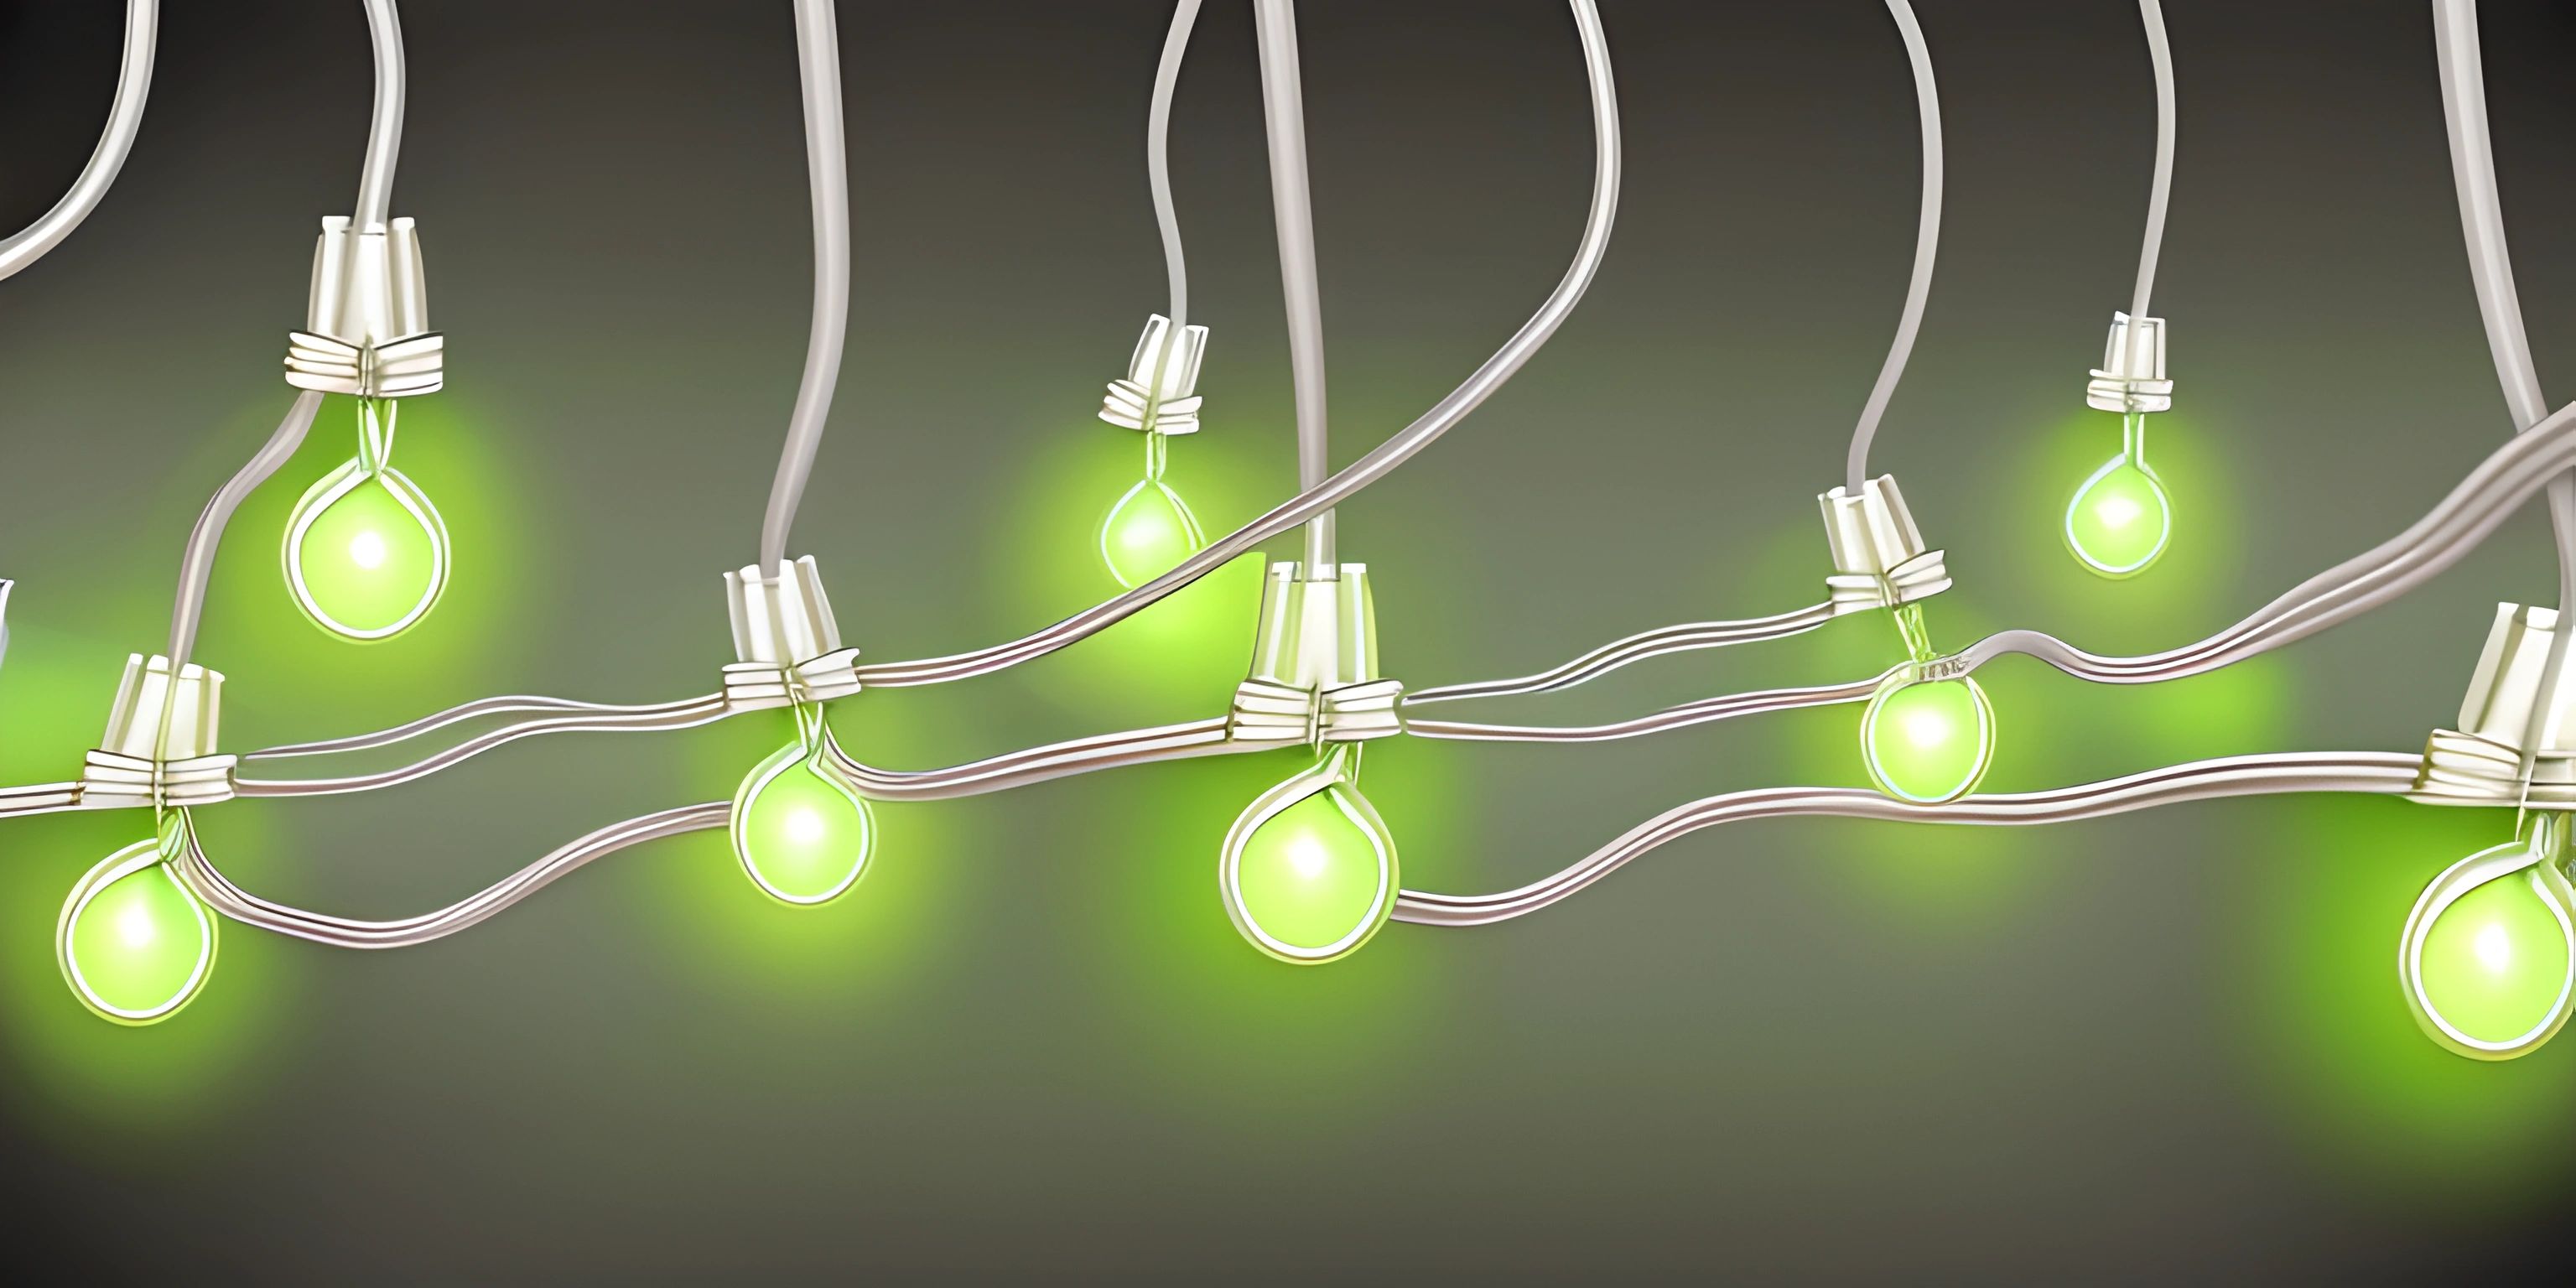 many white lights in wires and with green wires next to it on a gray surface